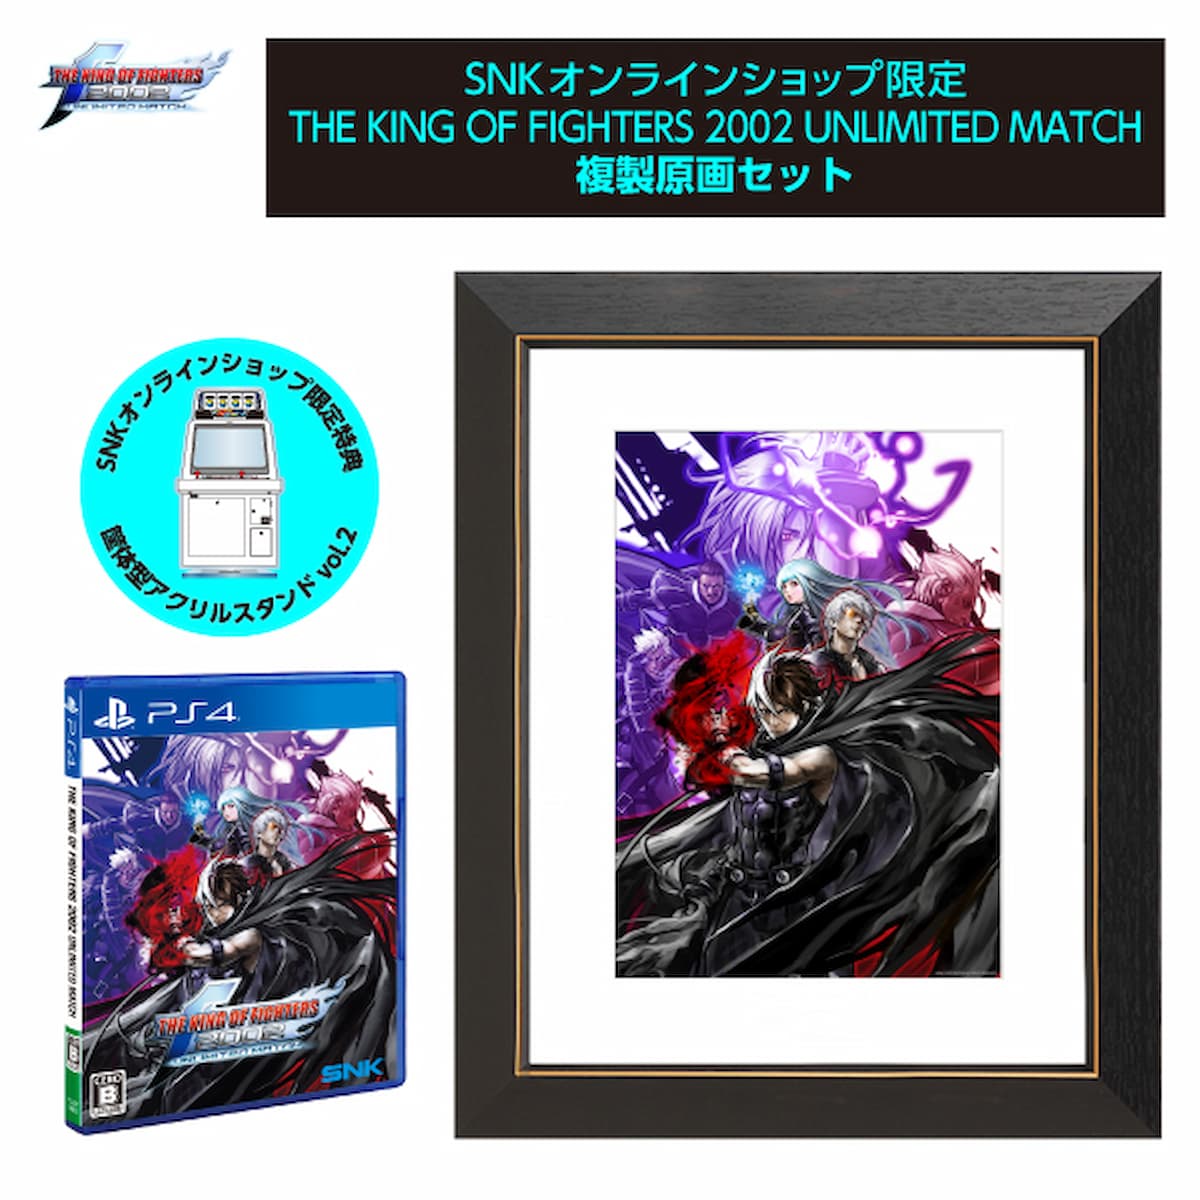 THE KING OF FIGHTERS 2002 UNLIMITED MATCH 複製原圖集--PS4